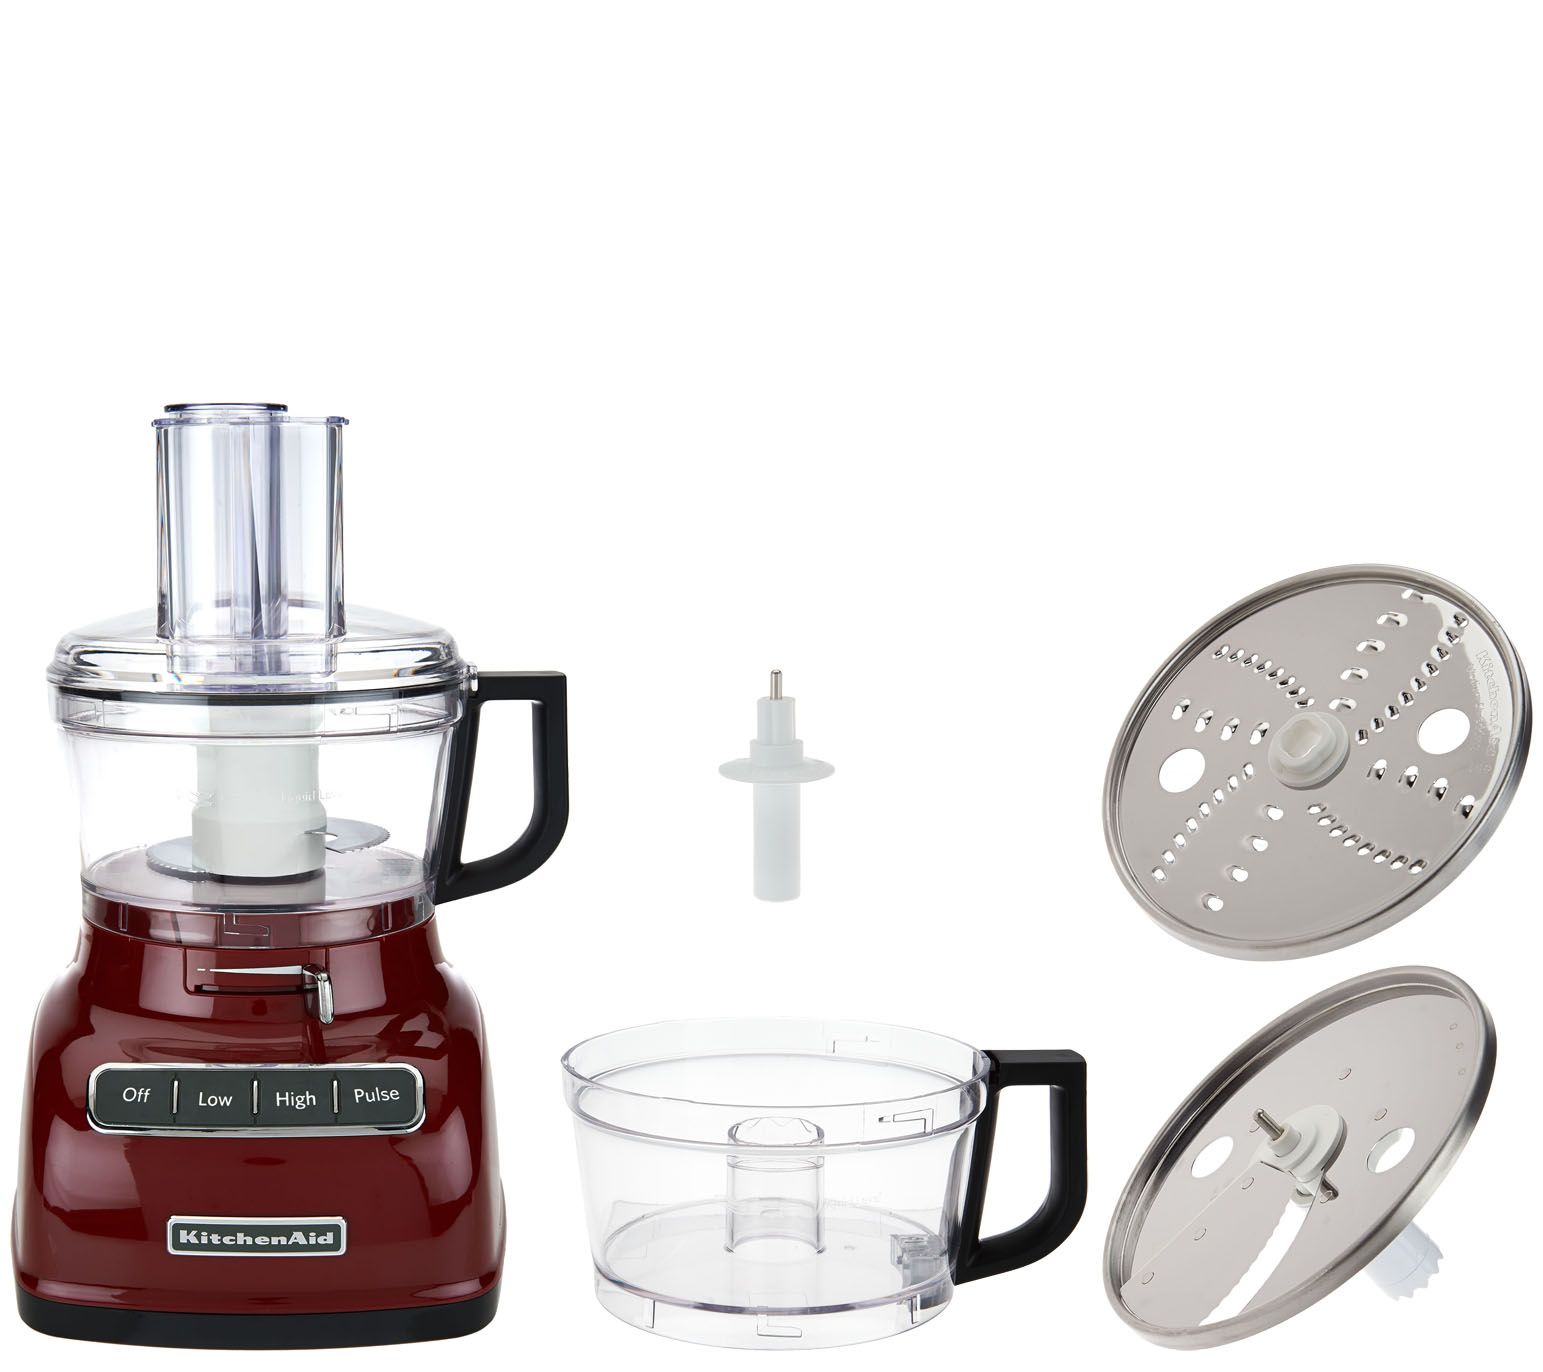 KitchenAid 13-Cup Food Processor Plus with Dicing Kit on QVC 